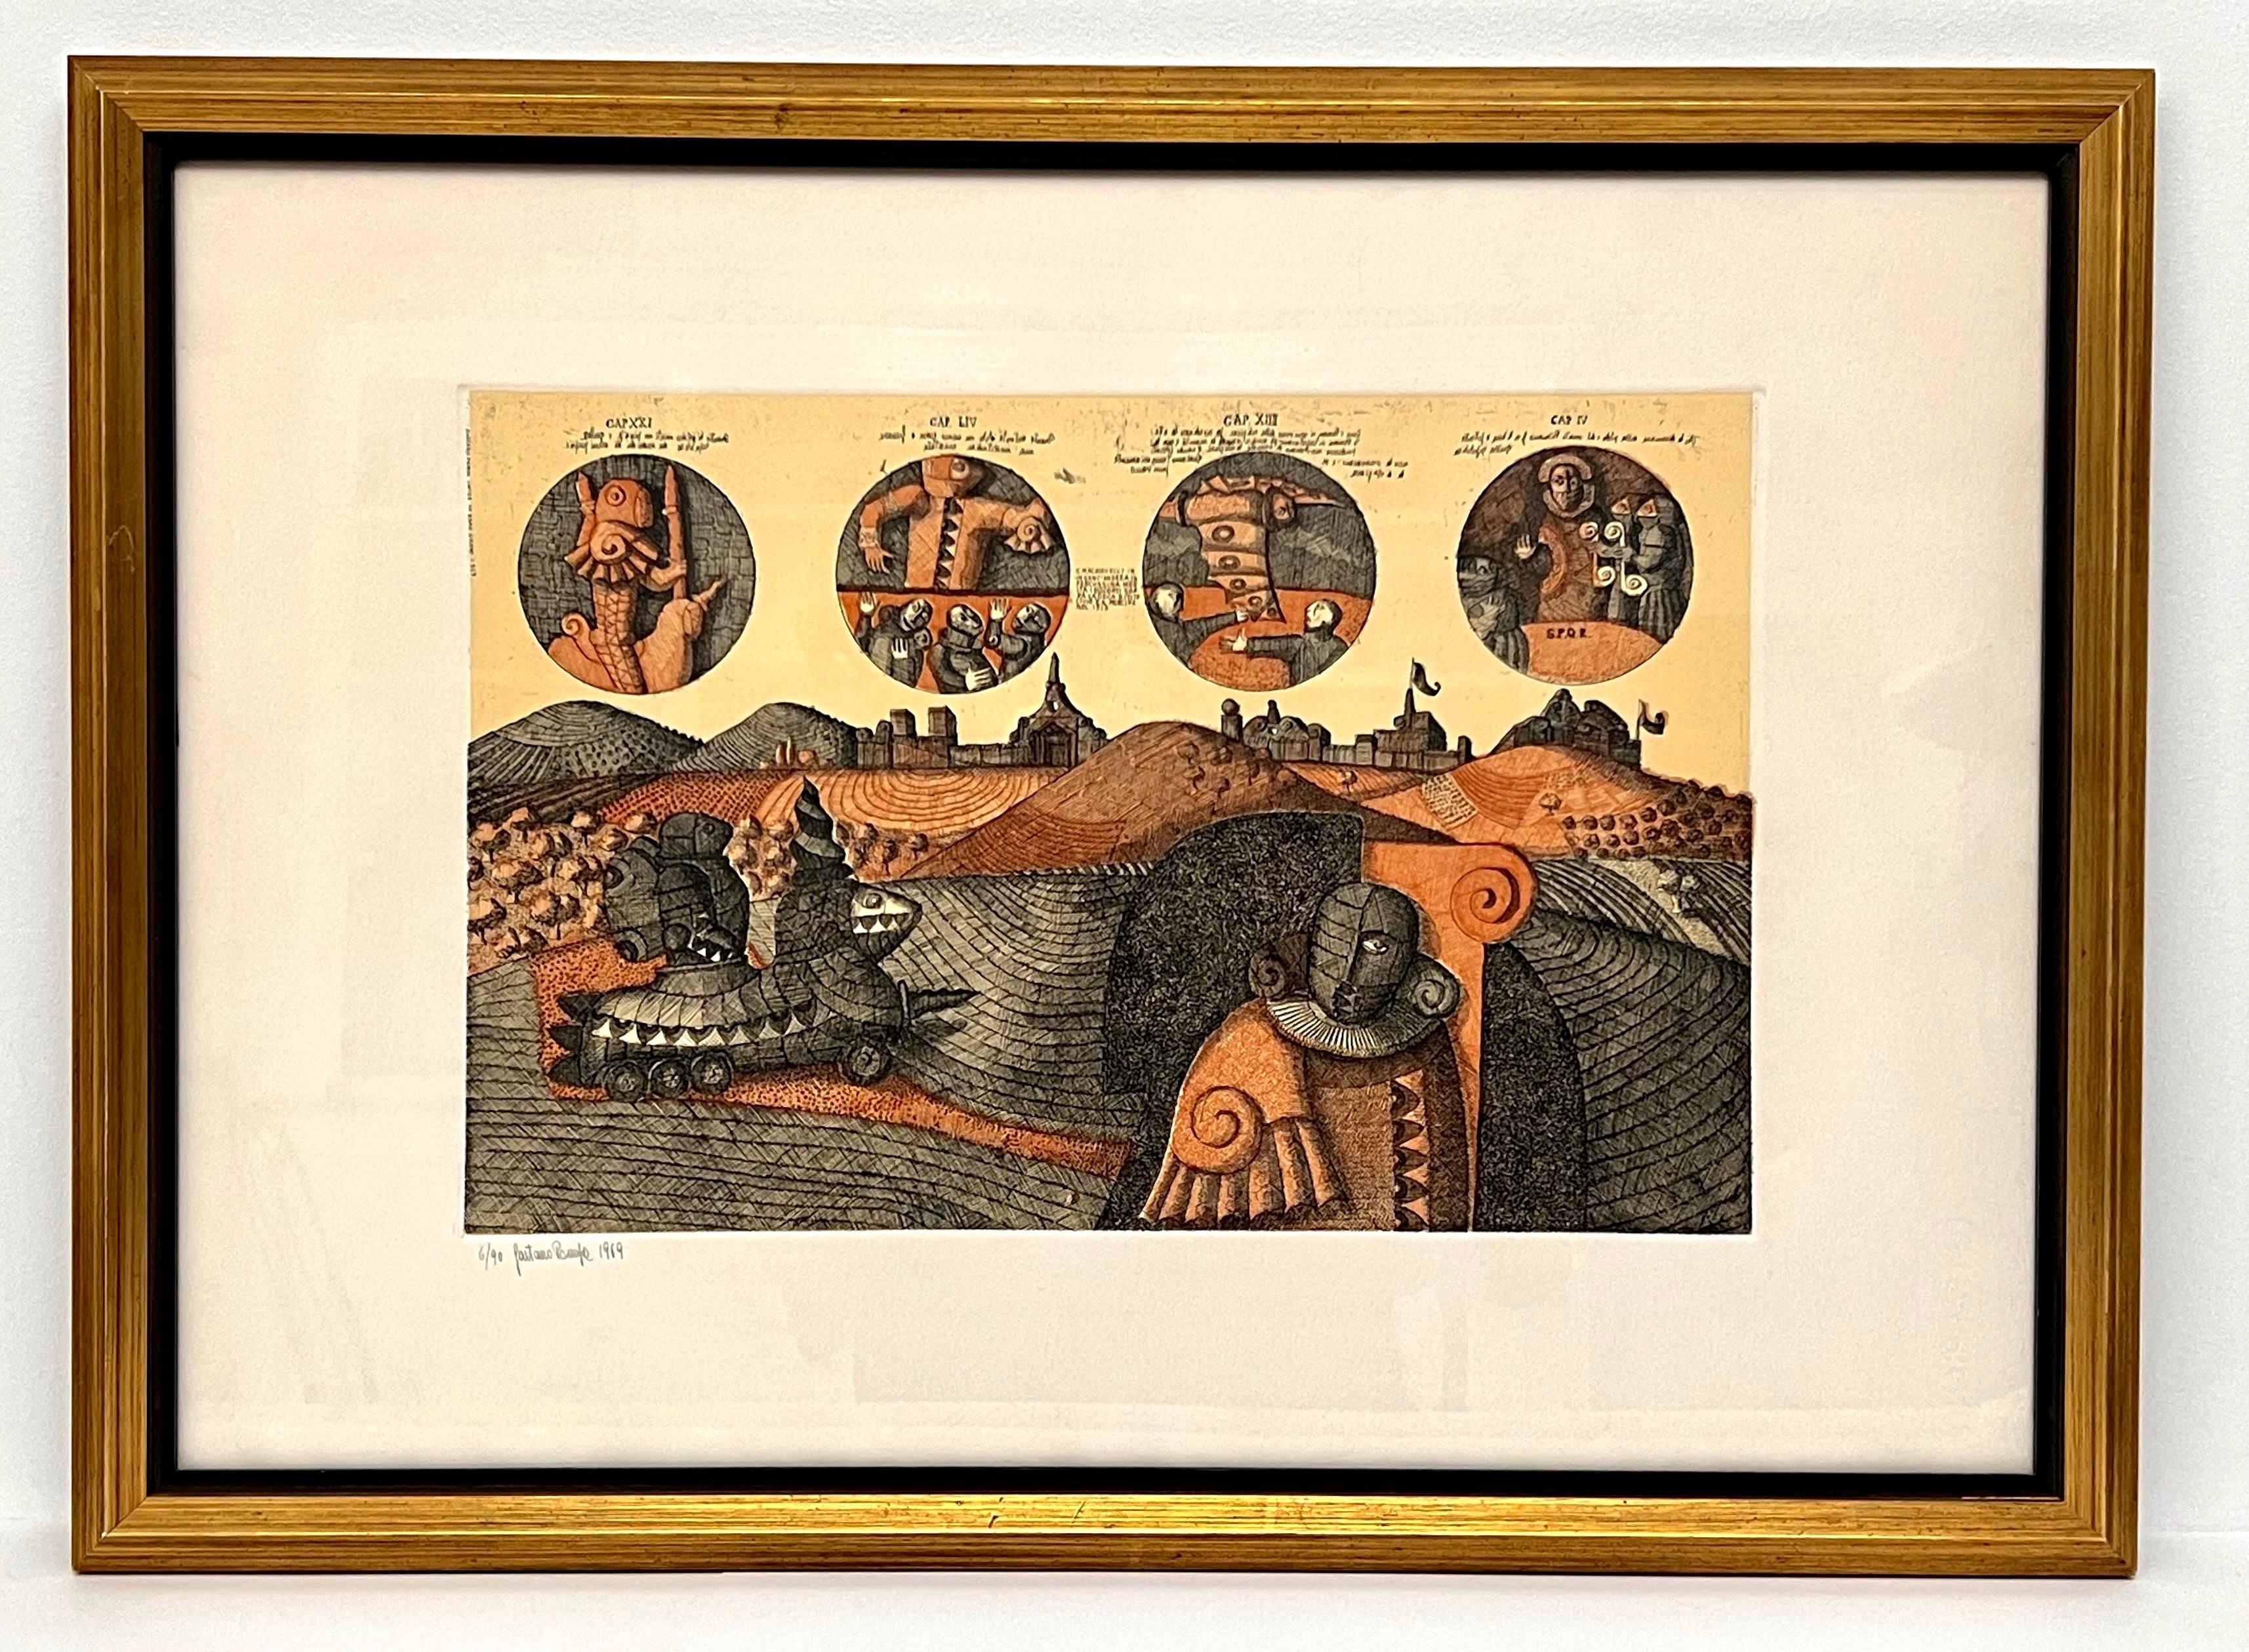 Whether it's a Gaetano Pompa painting or etching his work is definitely show stopping.  This is a great example of the world of Gaetano Pompa.  This 1969 etching captures his medieval history of characters with the figural surrealism of movement.  A